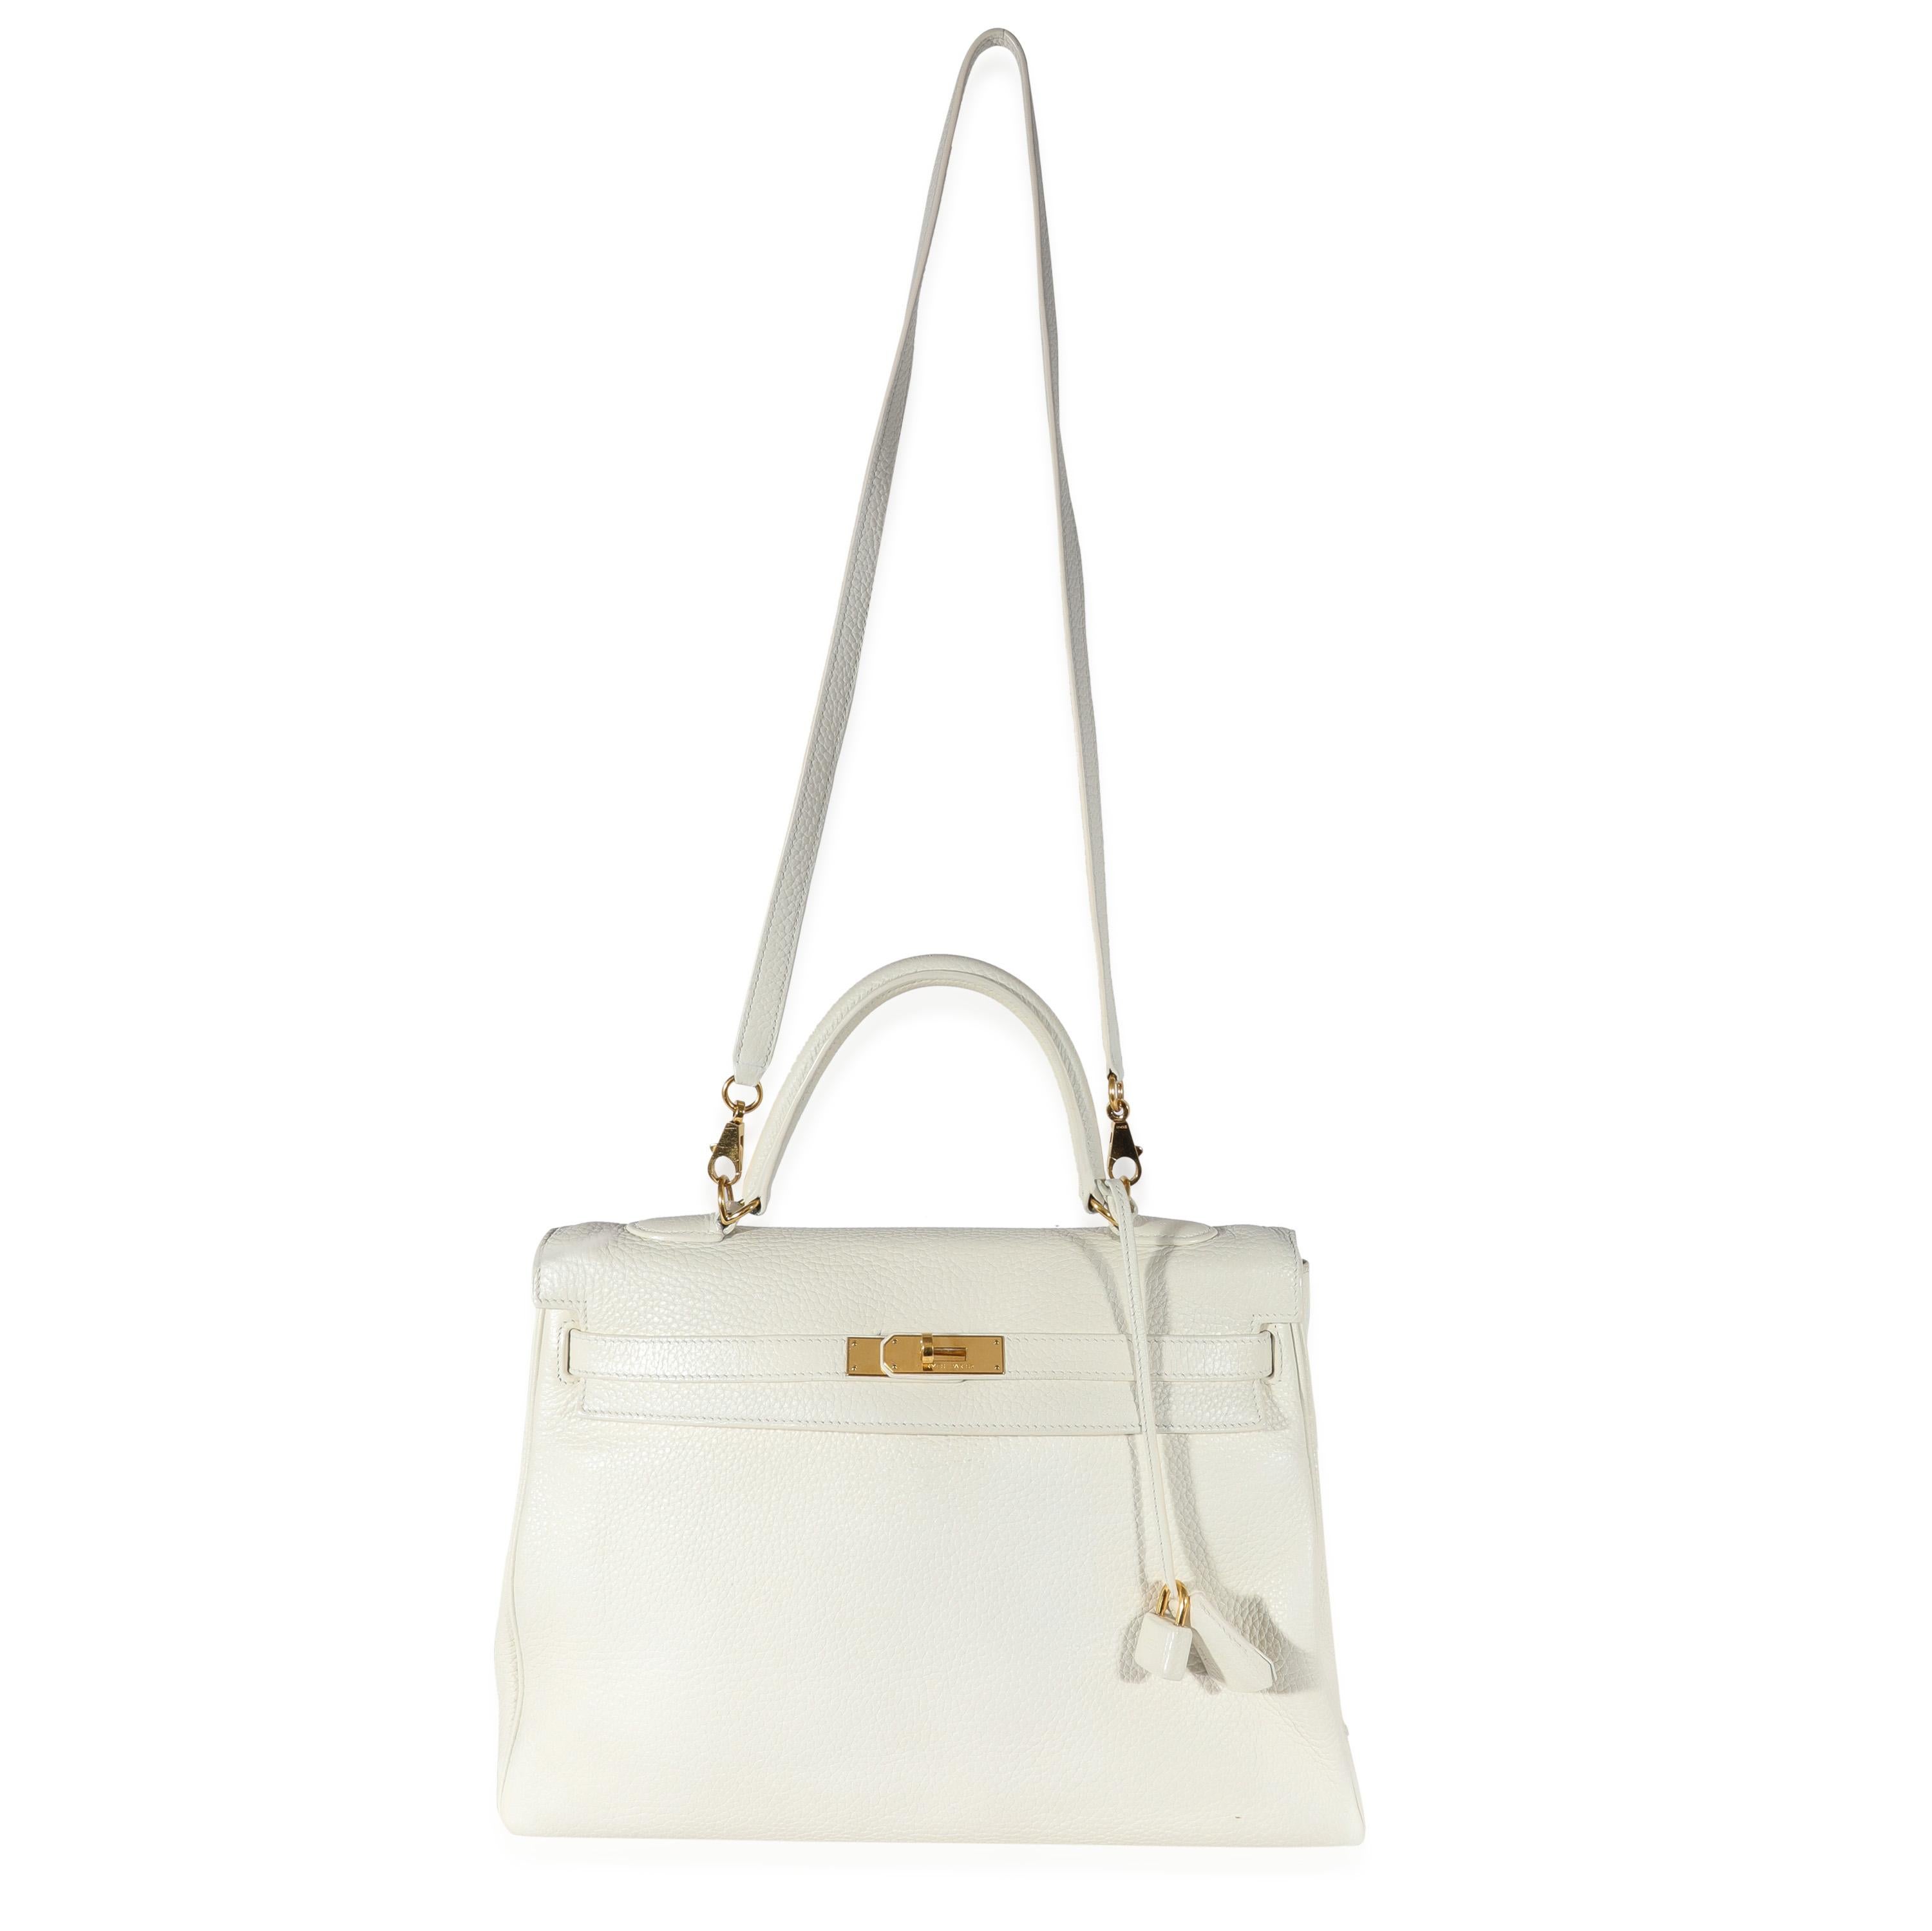 Listing Title: Hermès White Clémence Retourne Kelly 35 GHW
SKU: 122229
Condition: Pre-owned 
Handbag Condition: Very Good
Condition Comments: Very Good Condition. Scuffing at corners and throughout. Scratching and tarnishing at hardware. Light